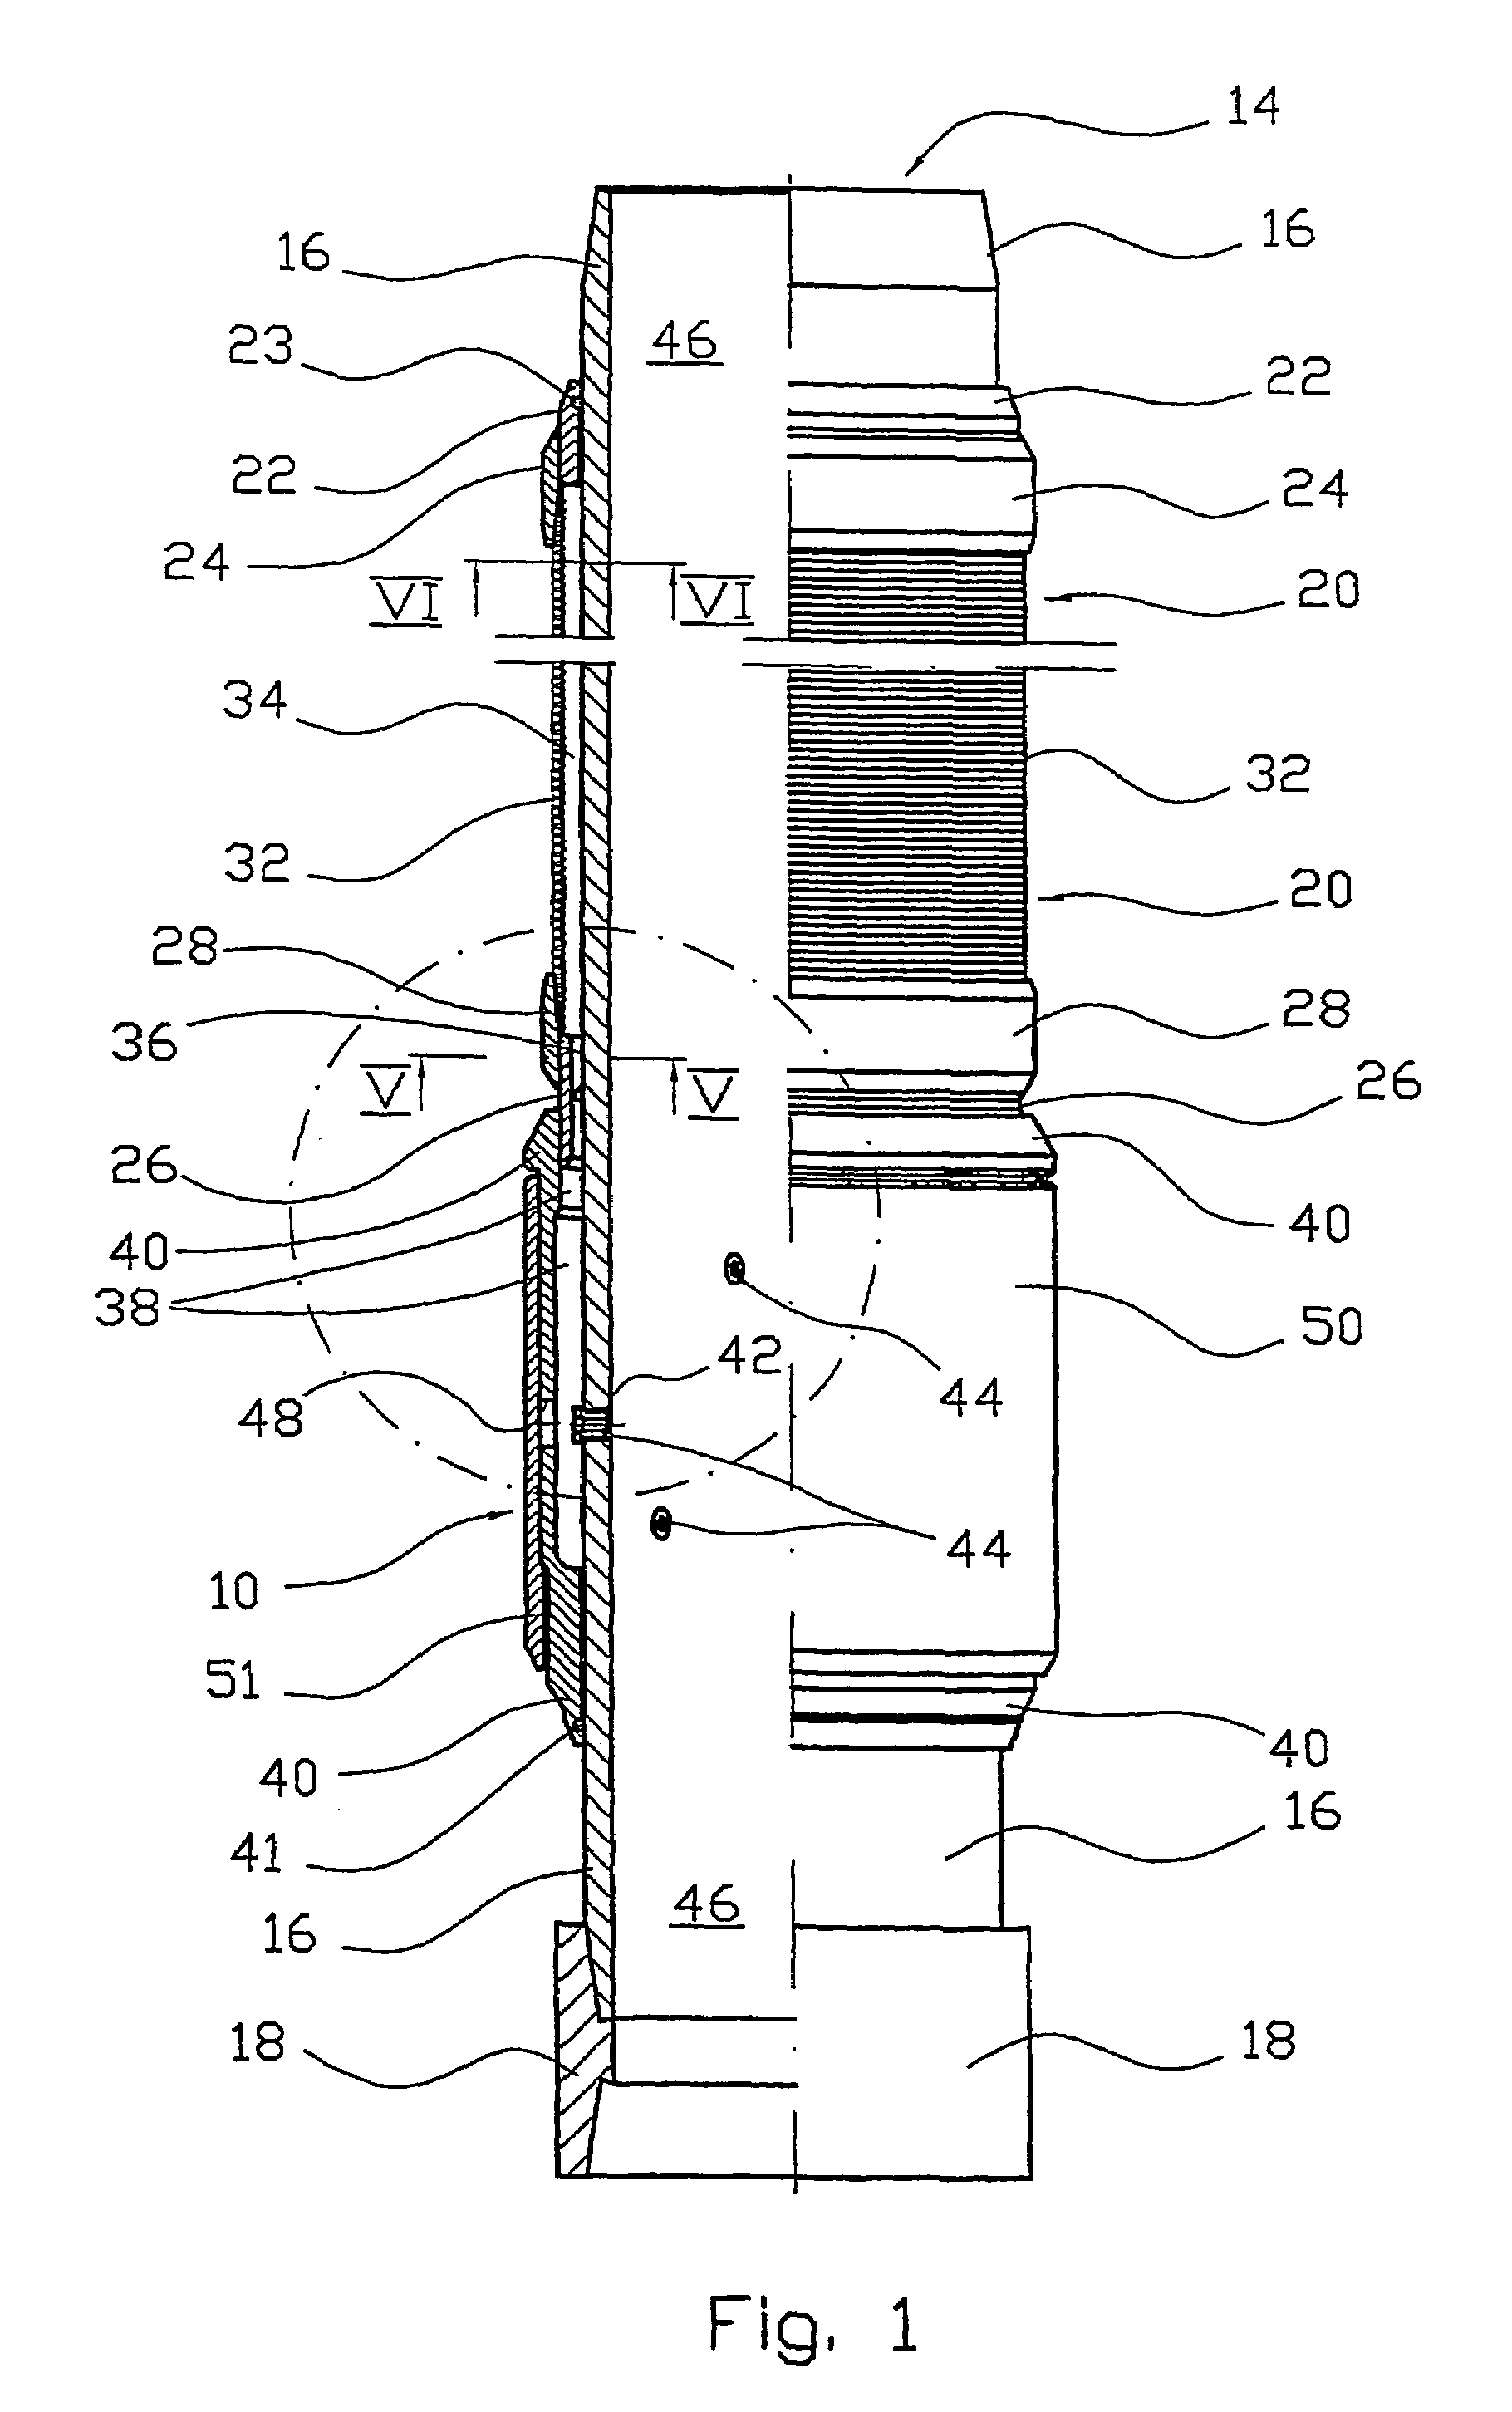 Flow control device for choking inflowing fluids in a well